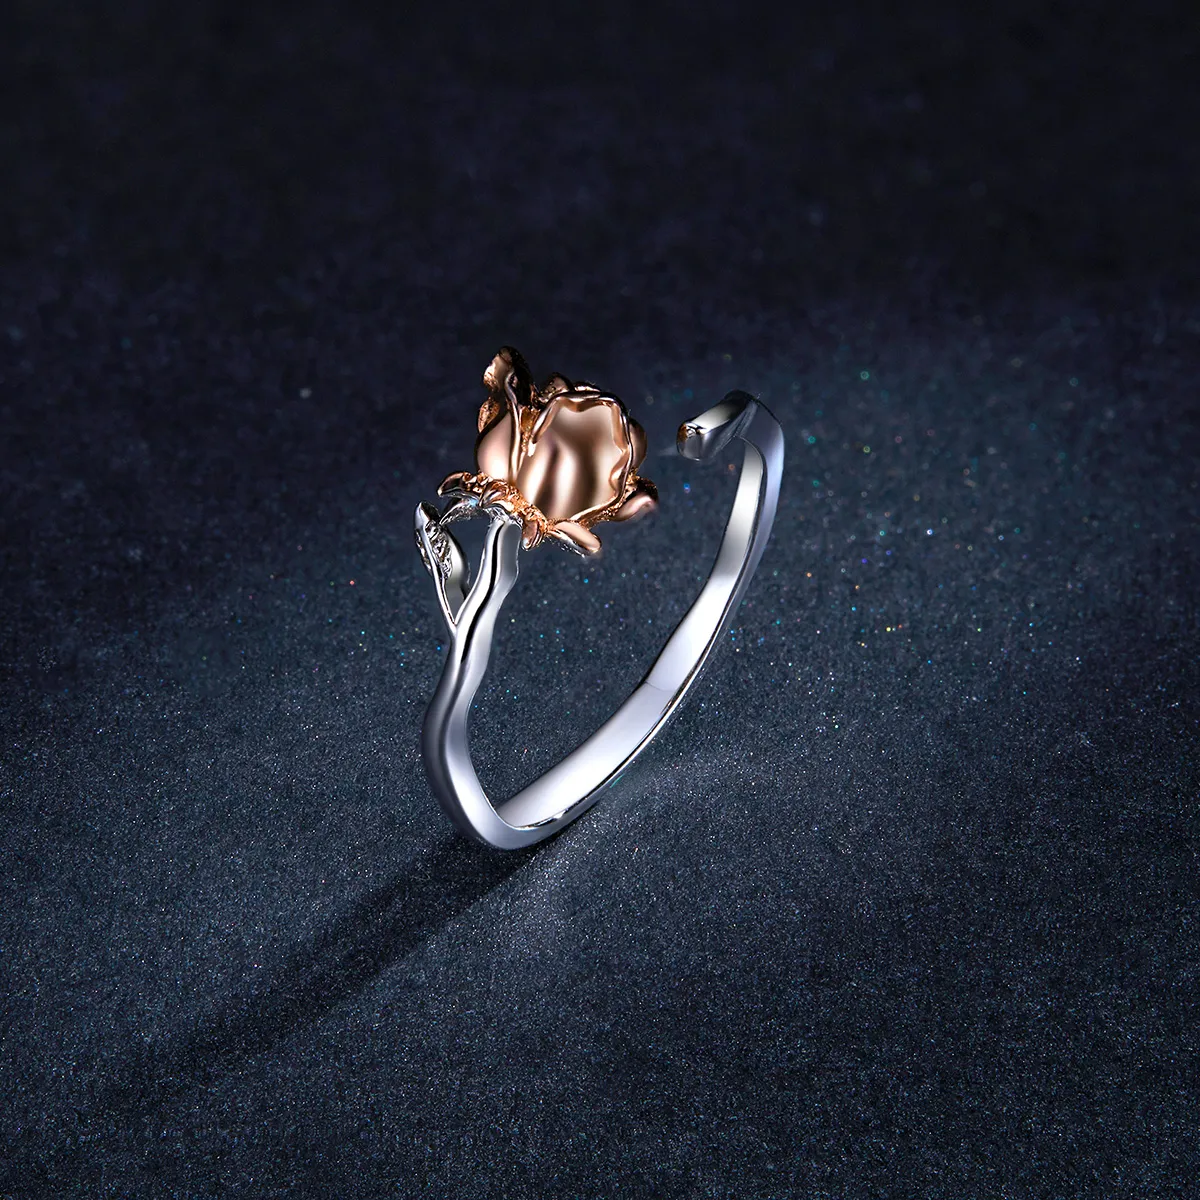 Pandora Style Two Tone Rose Gold Flower Open Ring - BSR134